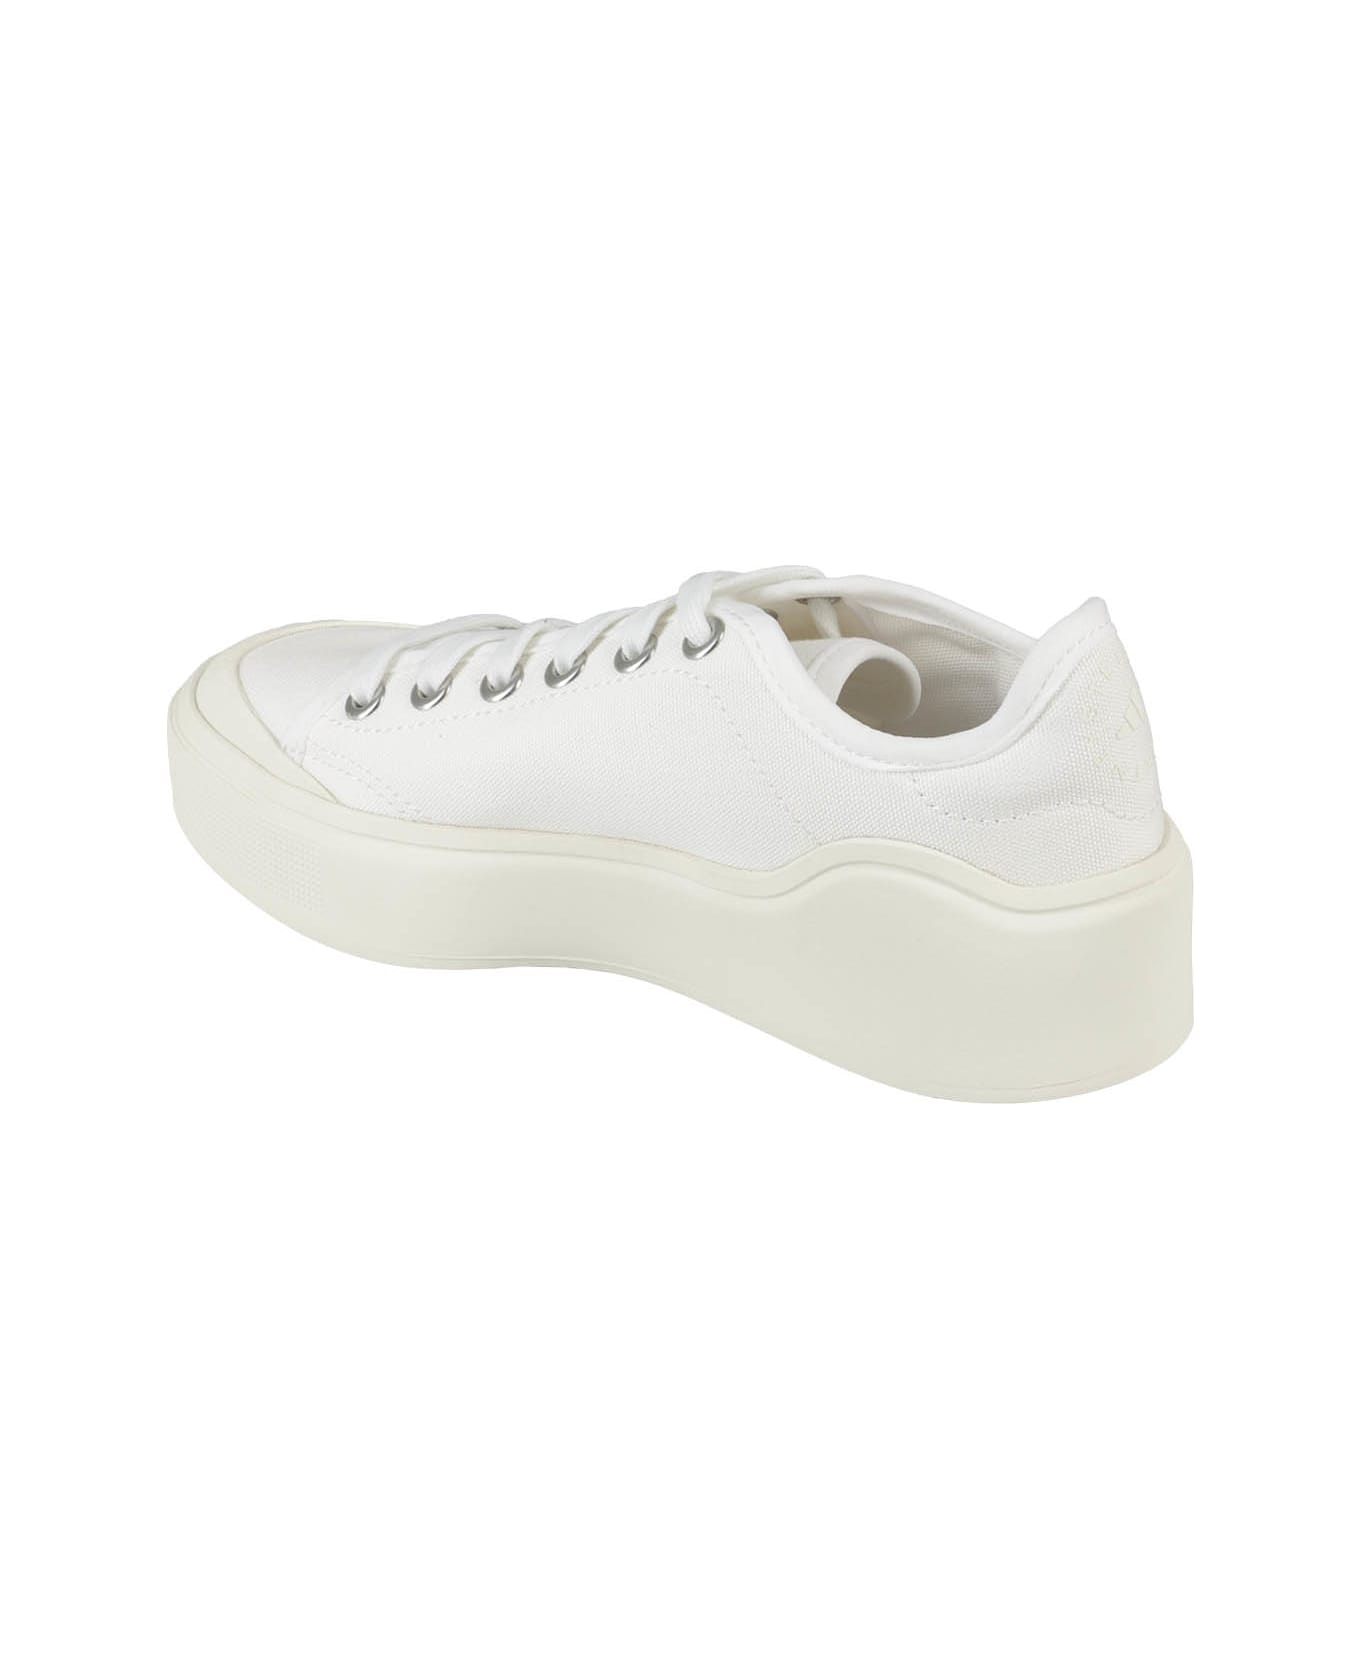 Adidas by Stella McCartney Court Cotton Sneakers Hq8675 - Bianco